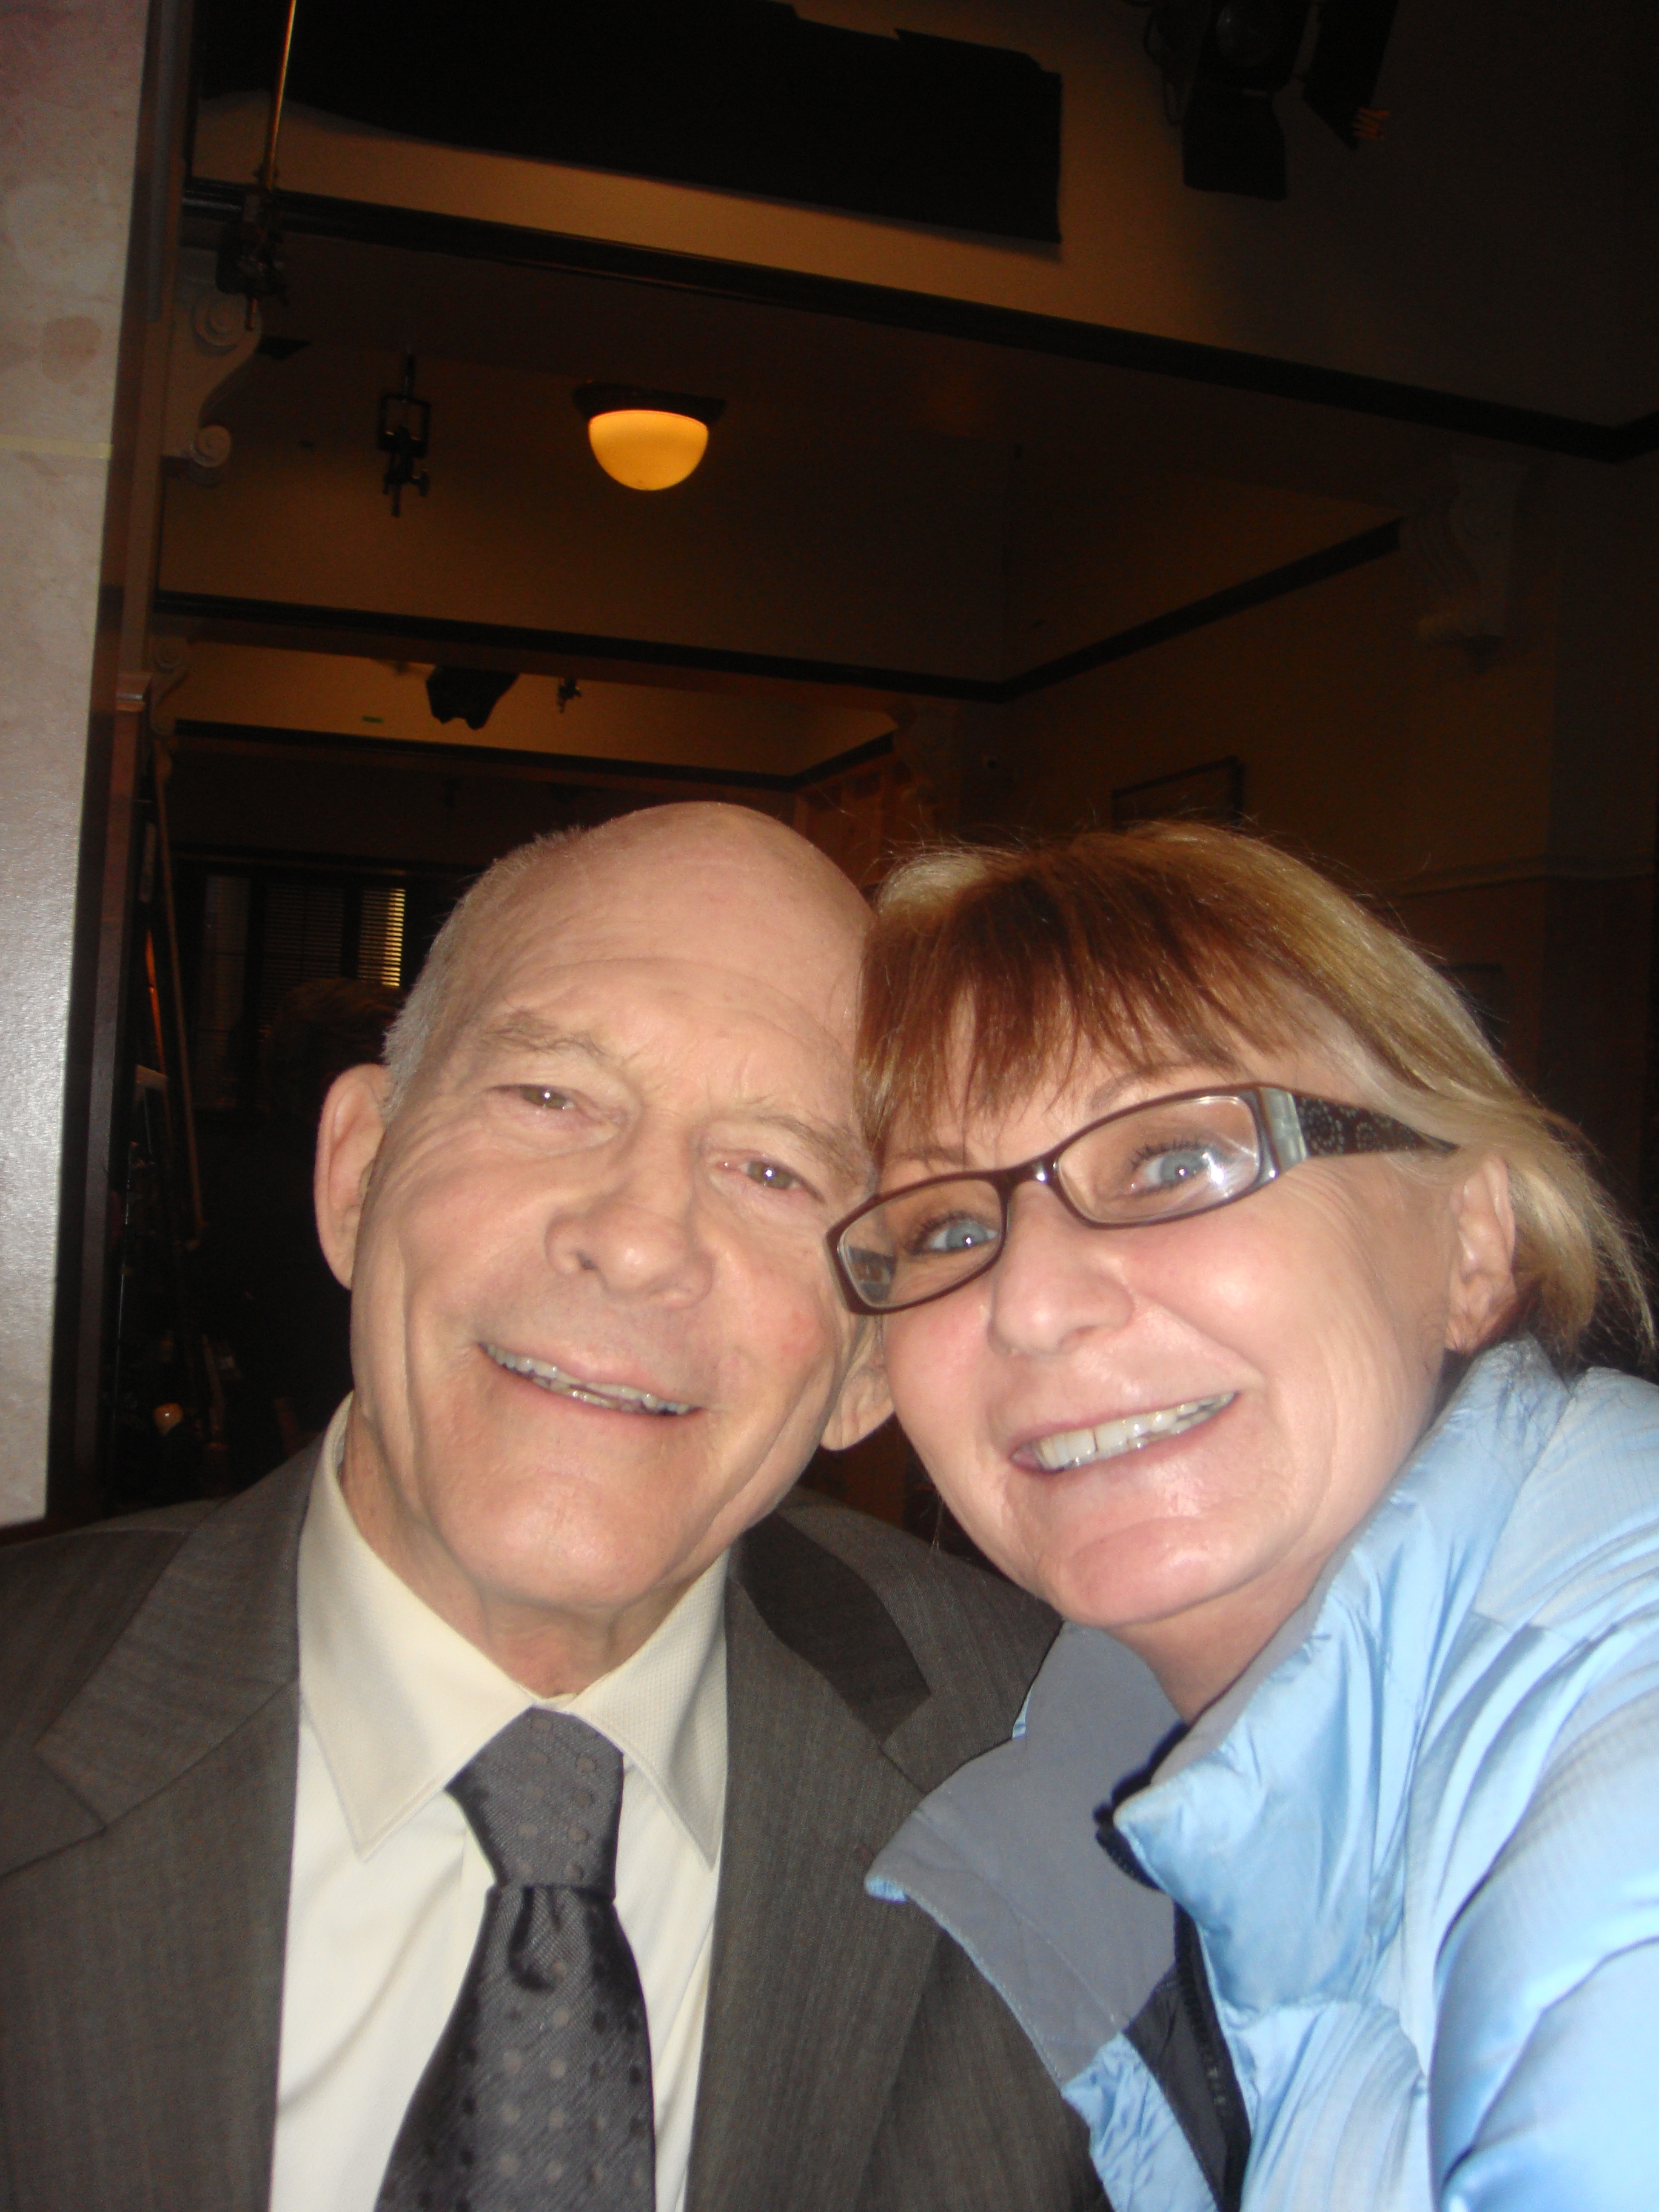 RAMONA AND MAX GAIL REUNITE ON HARRY'S LAW ,WARNERS LOT SPRING 2011